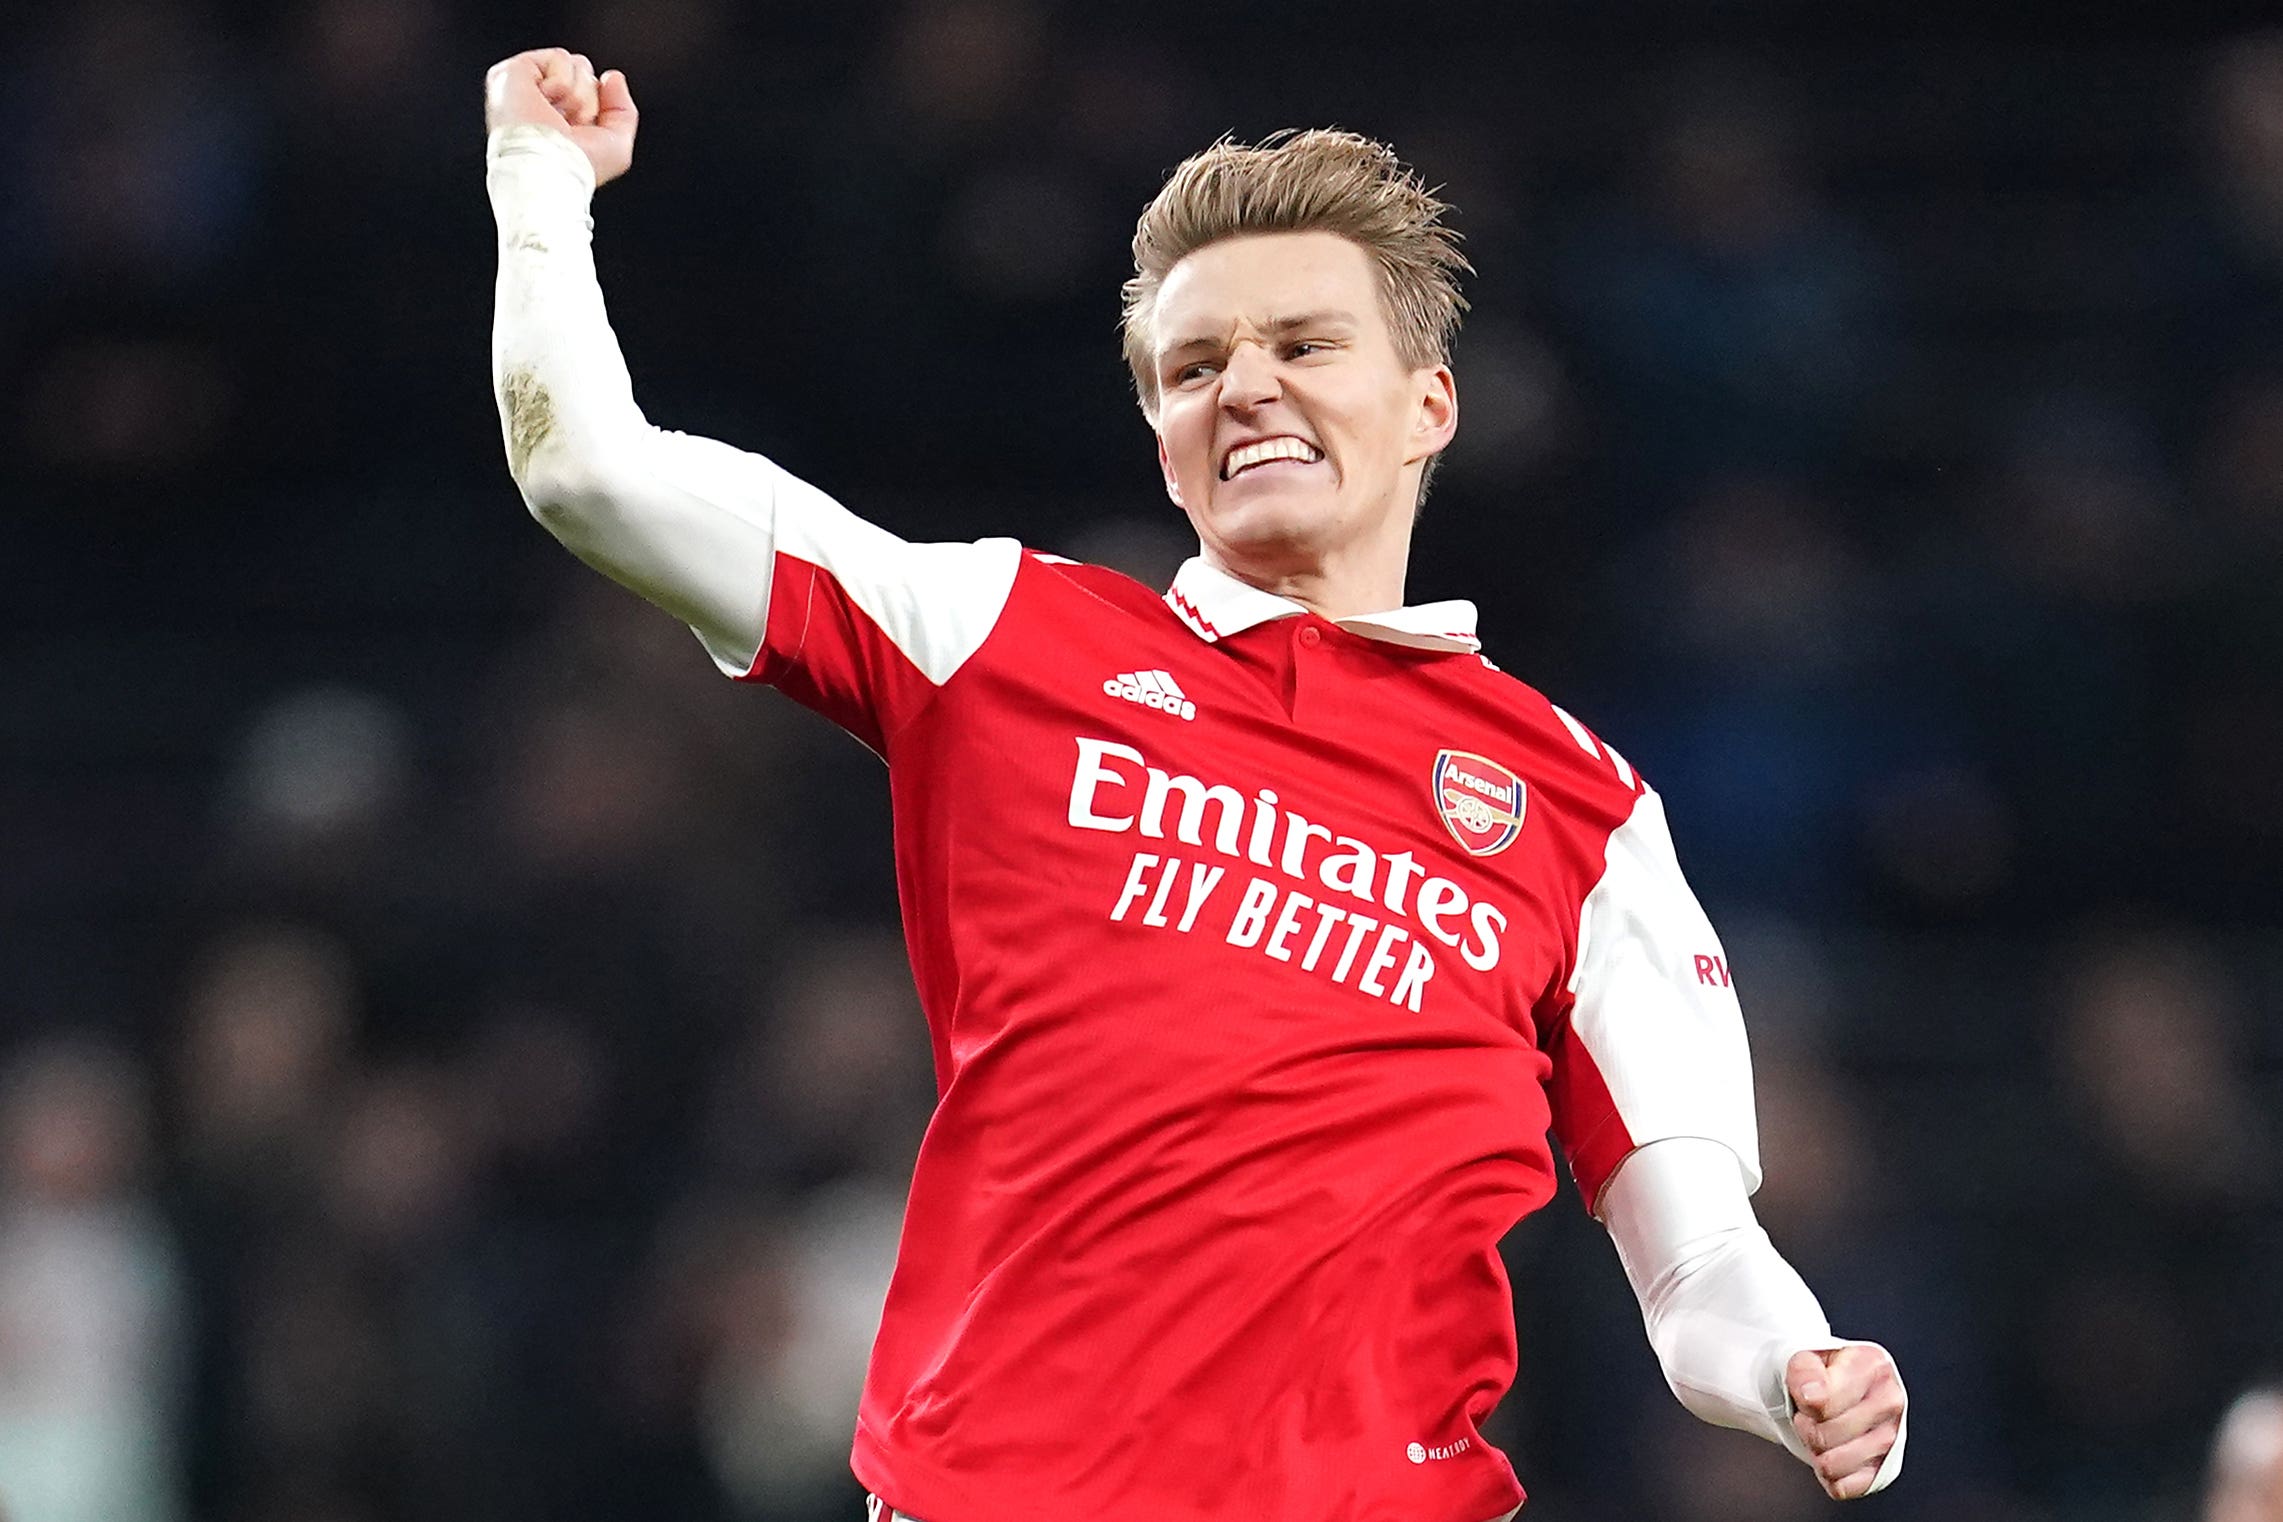 Odegaard has become integral to Arsenal’s attacking play